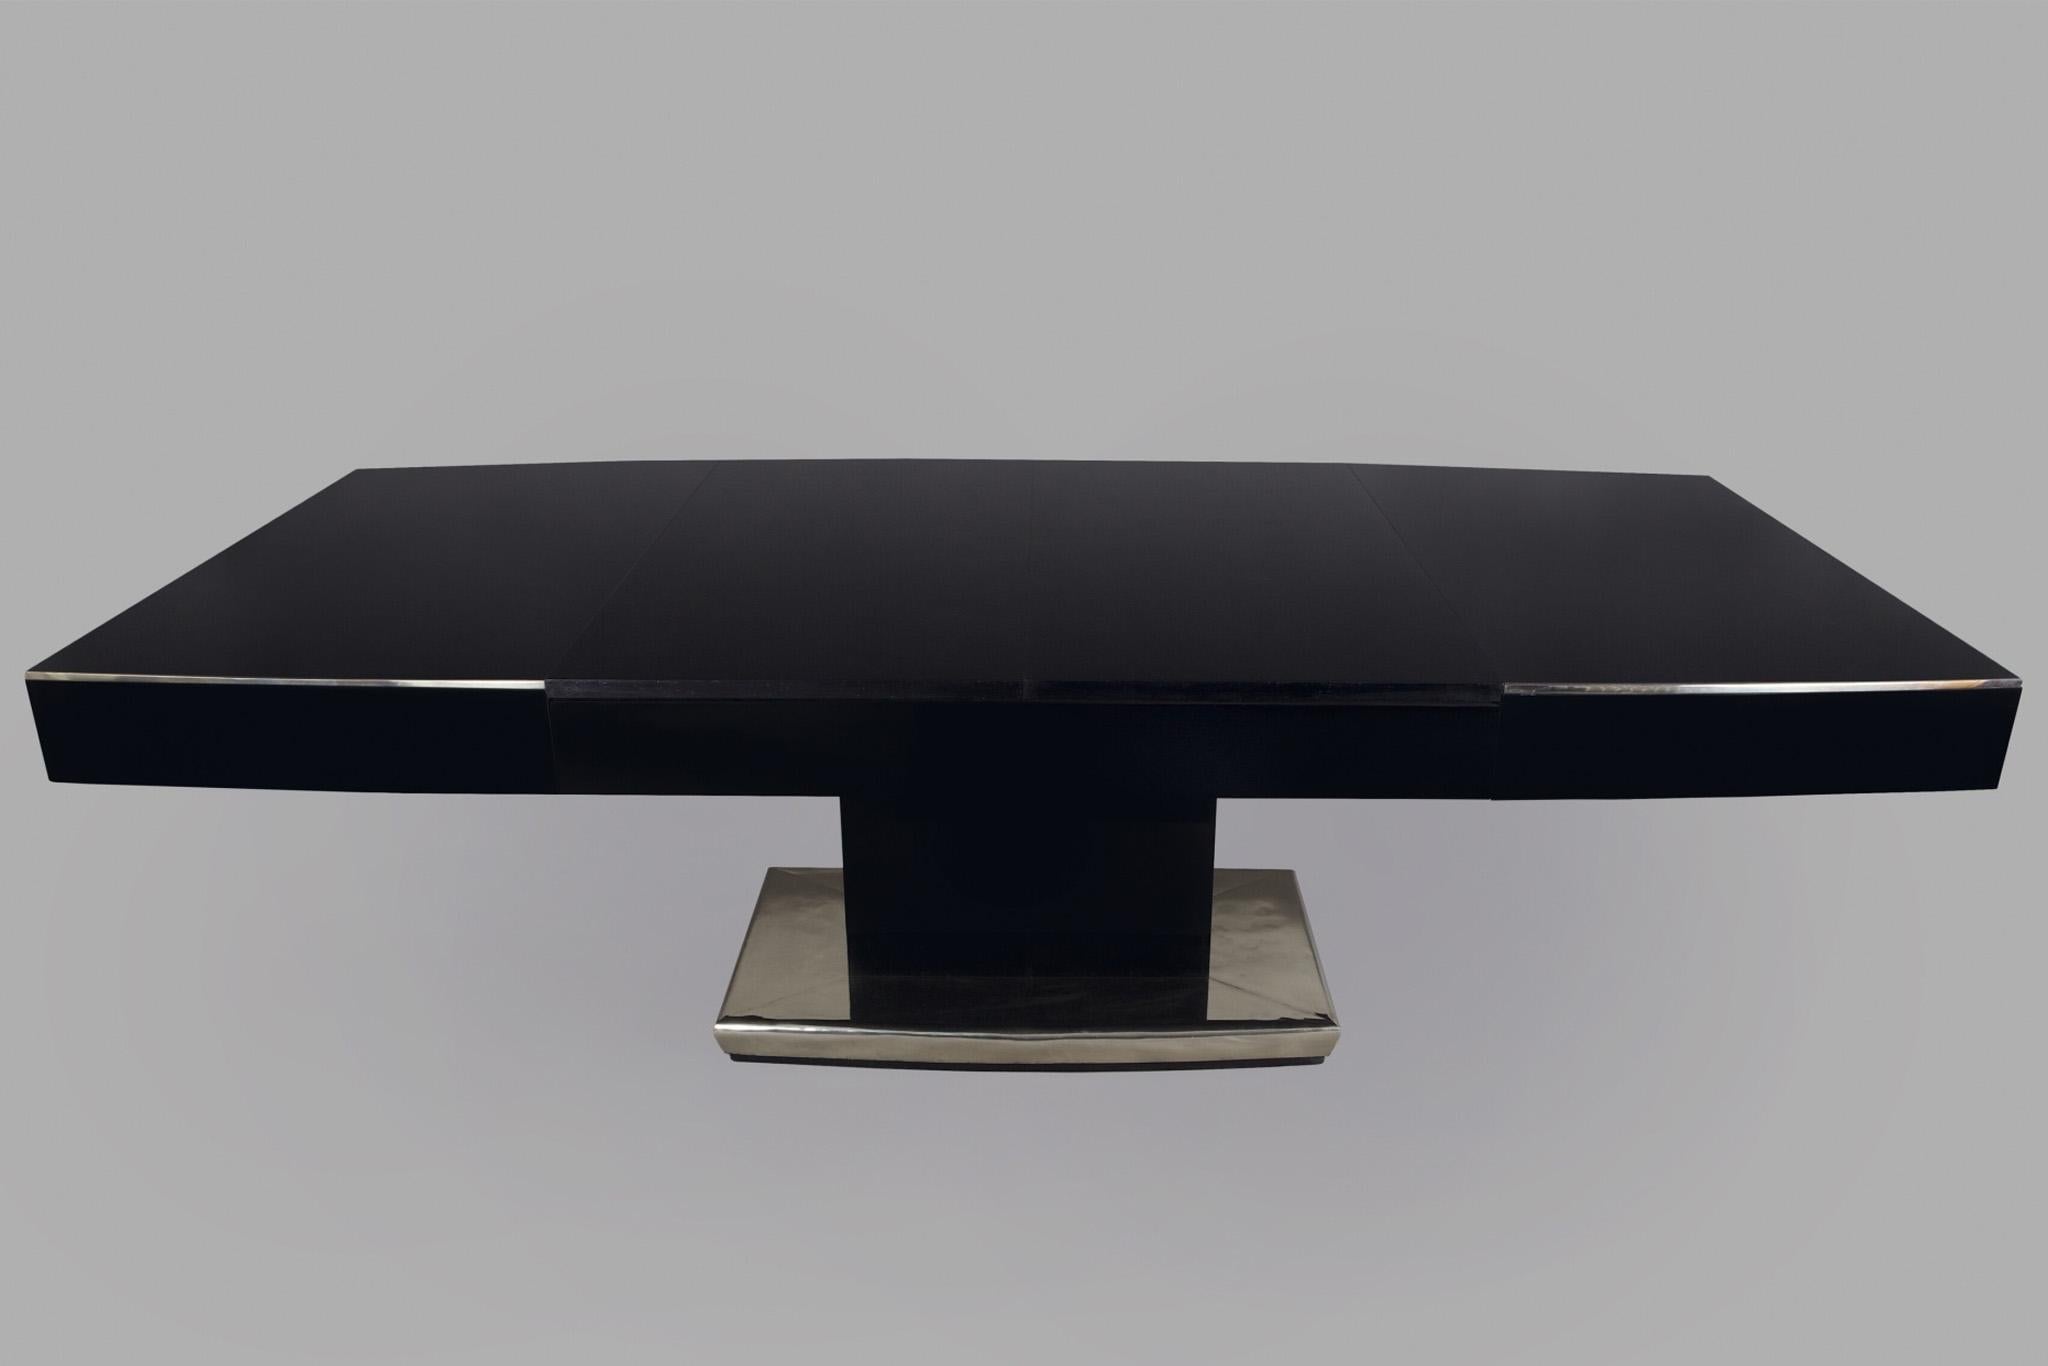 Chrome Black Art Deco Dining Table Made in 1930s Czechia, Fully Restored For Sale